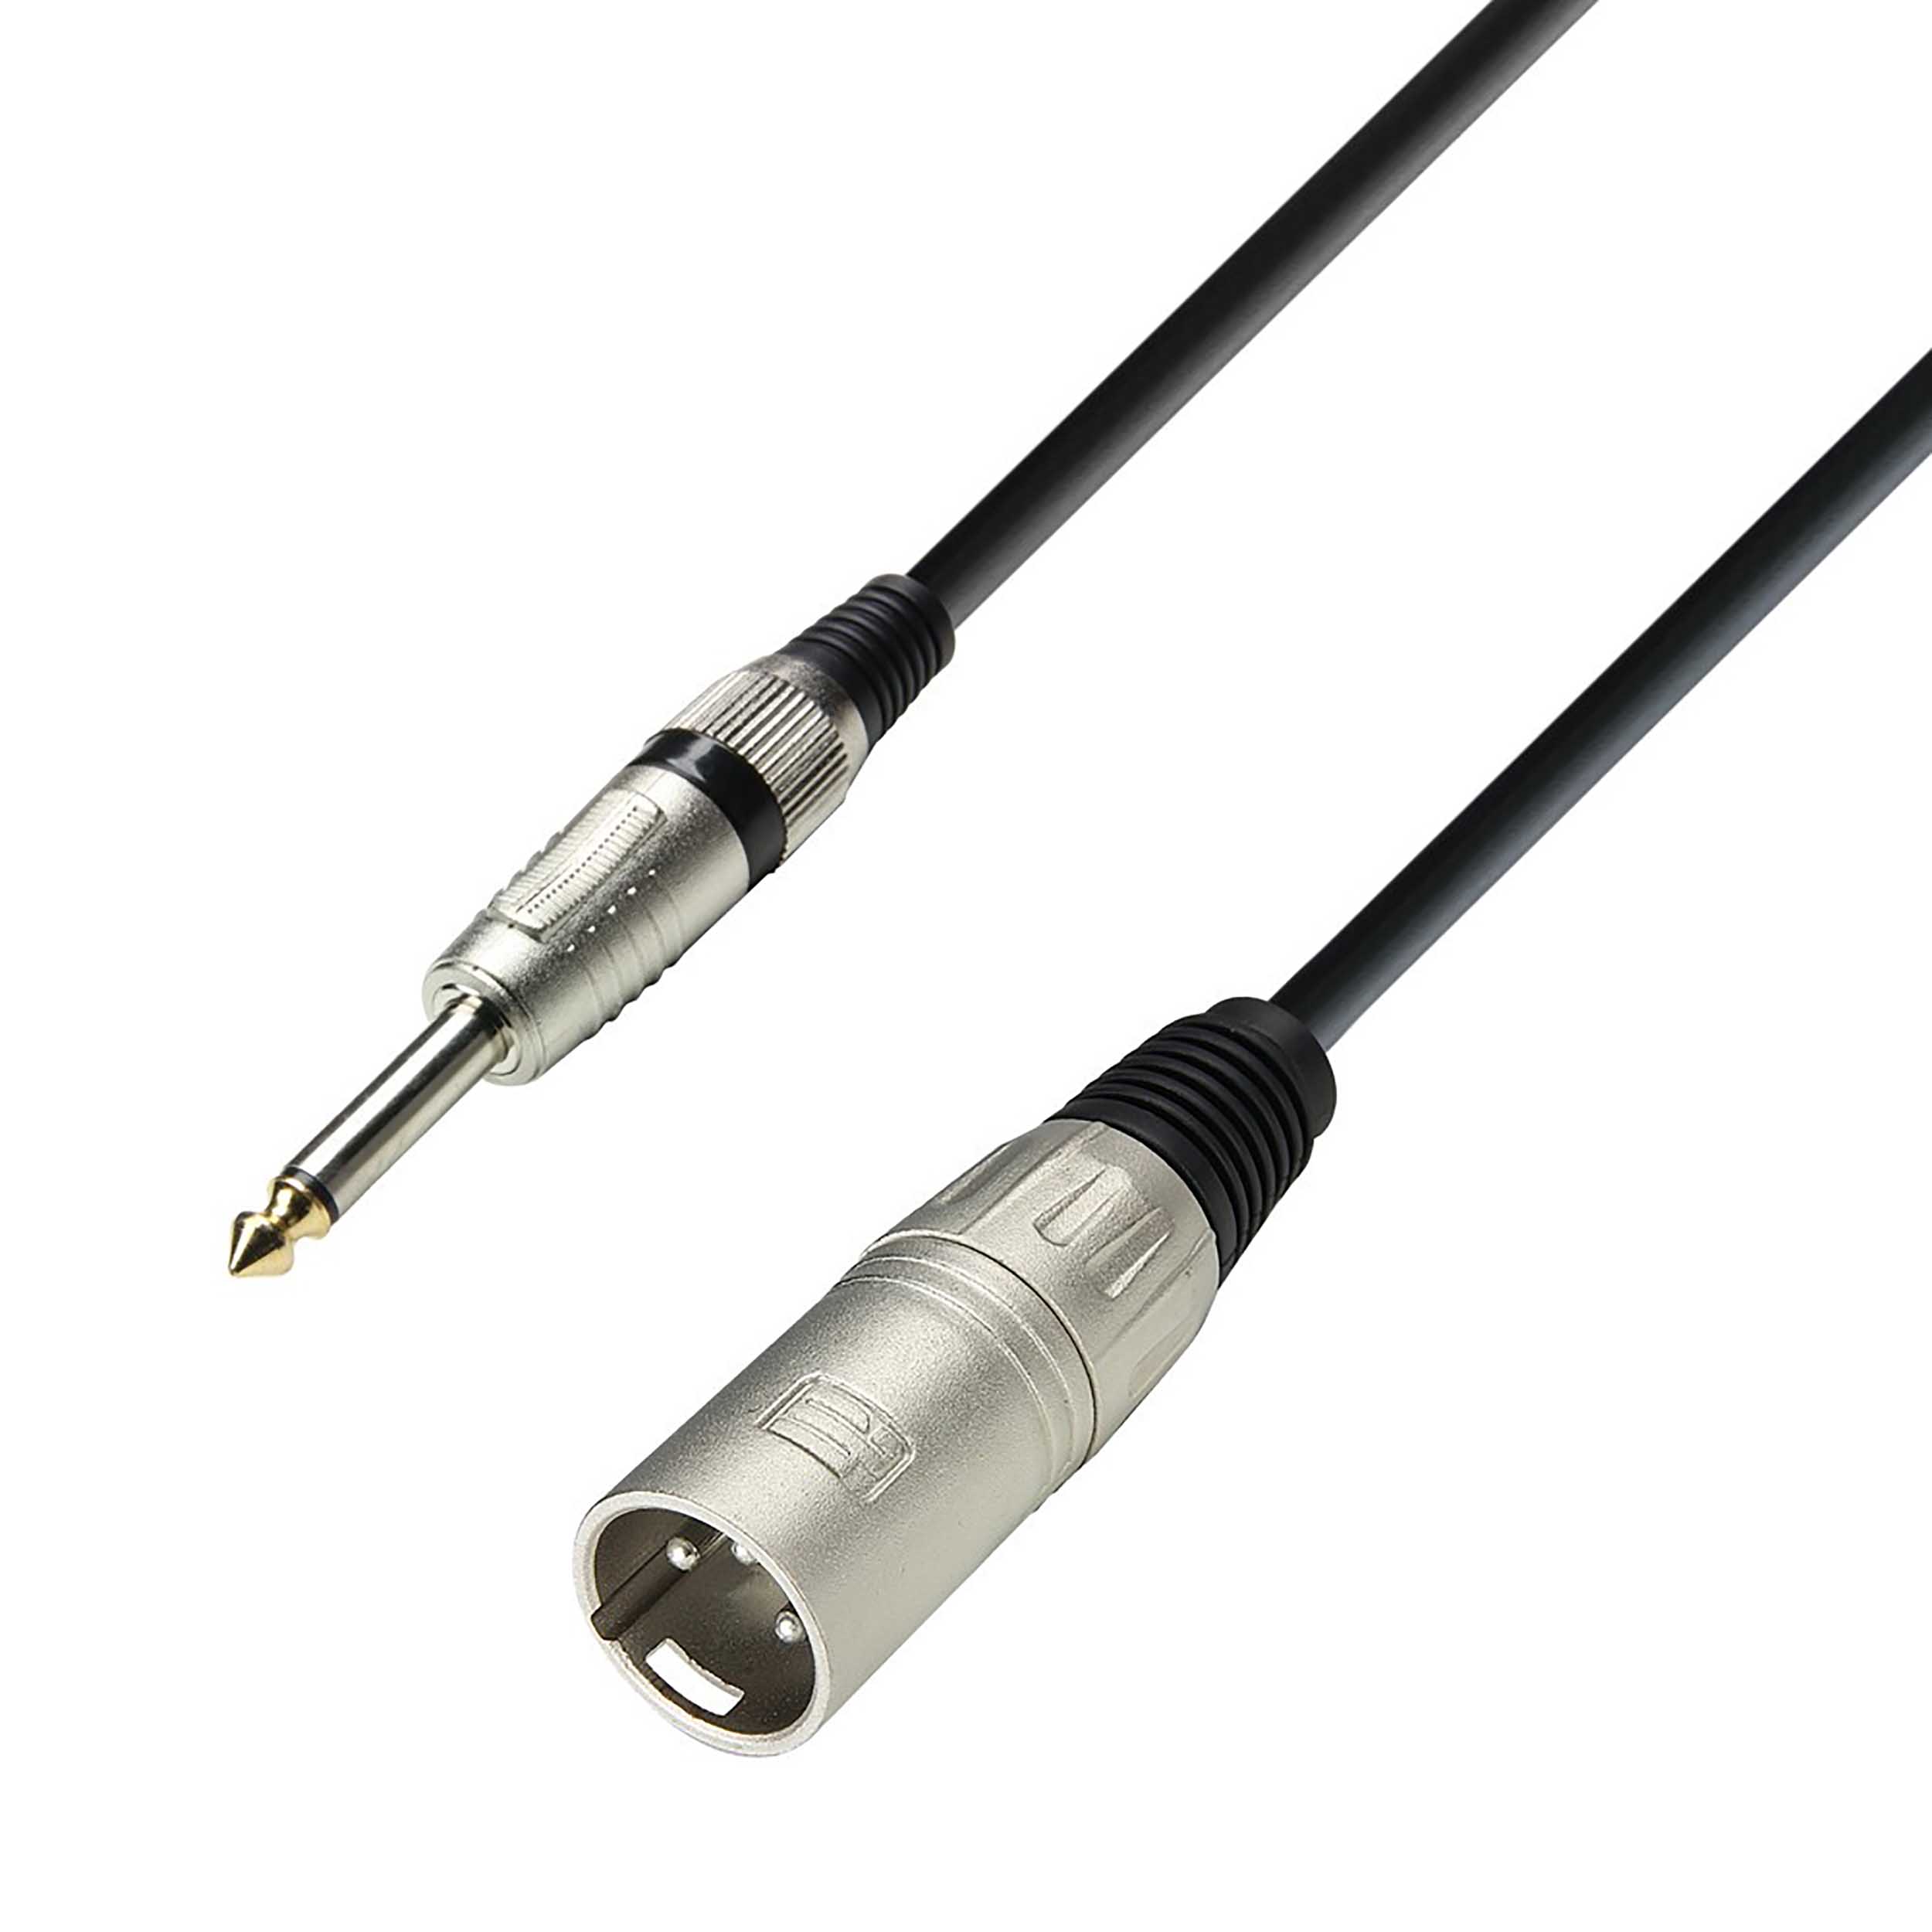 Adam Hall Cables 3 STAR MMP 0300 Unbalanced Cable XLR Male to Jack TS - 3 M by Adam Hall